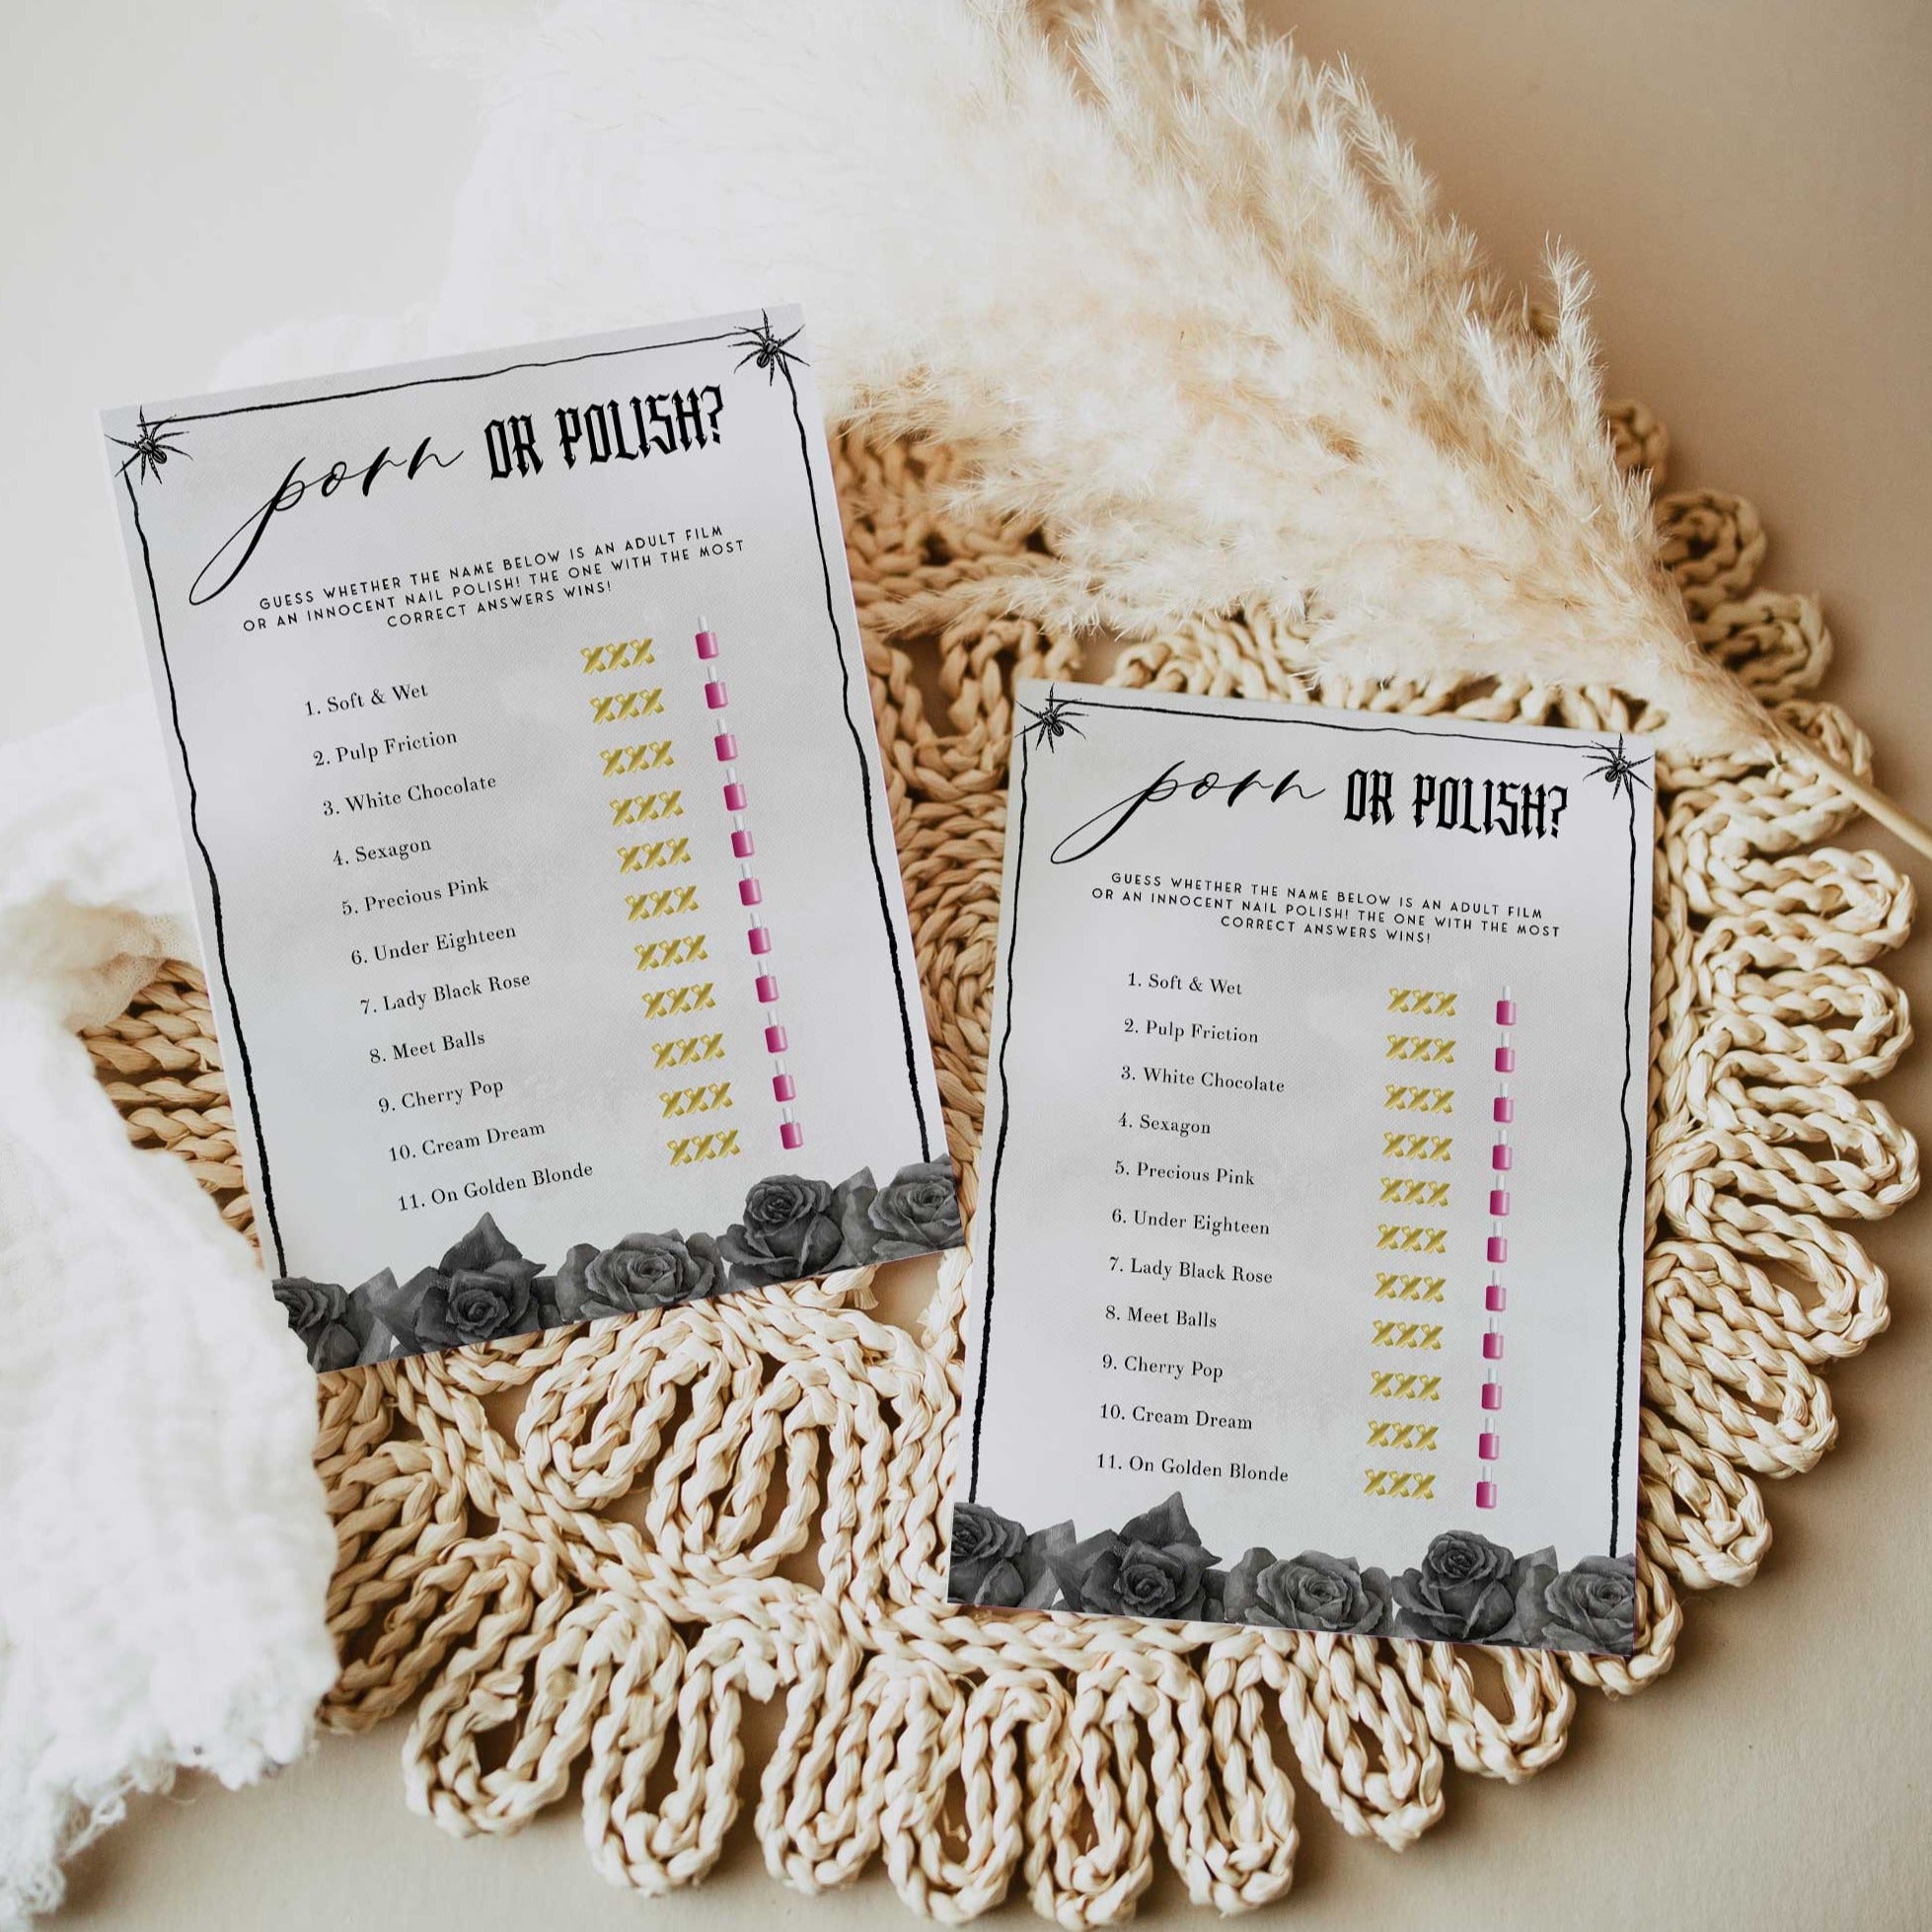 Fully editable and printable bridal shower porn or polish game with a gothic design. Perfect for a Bride or Die or Death Us To Party bridal shower themed party